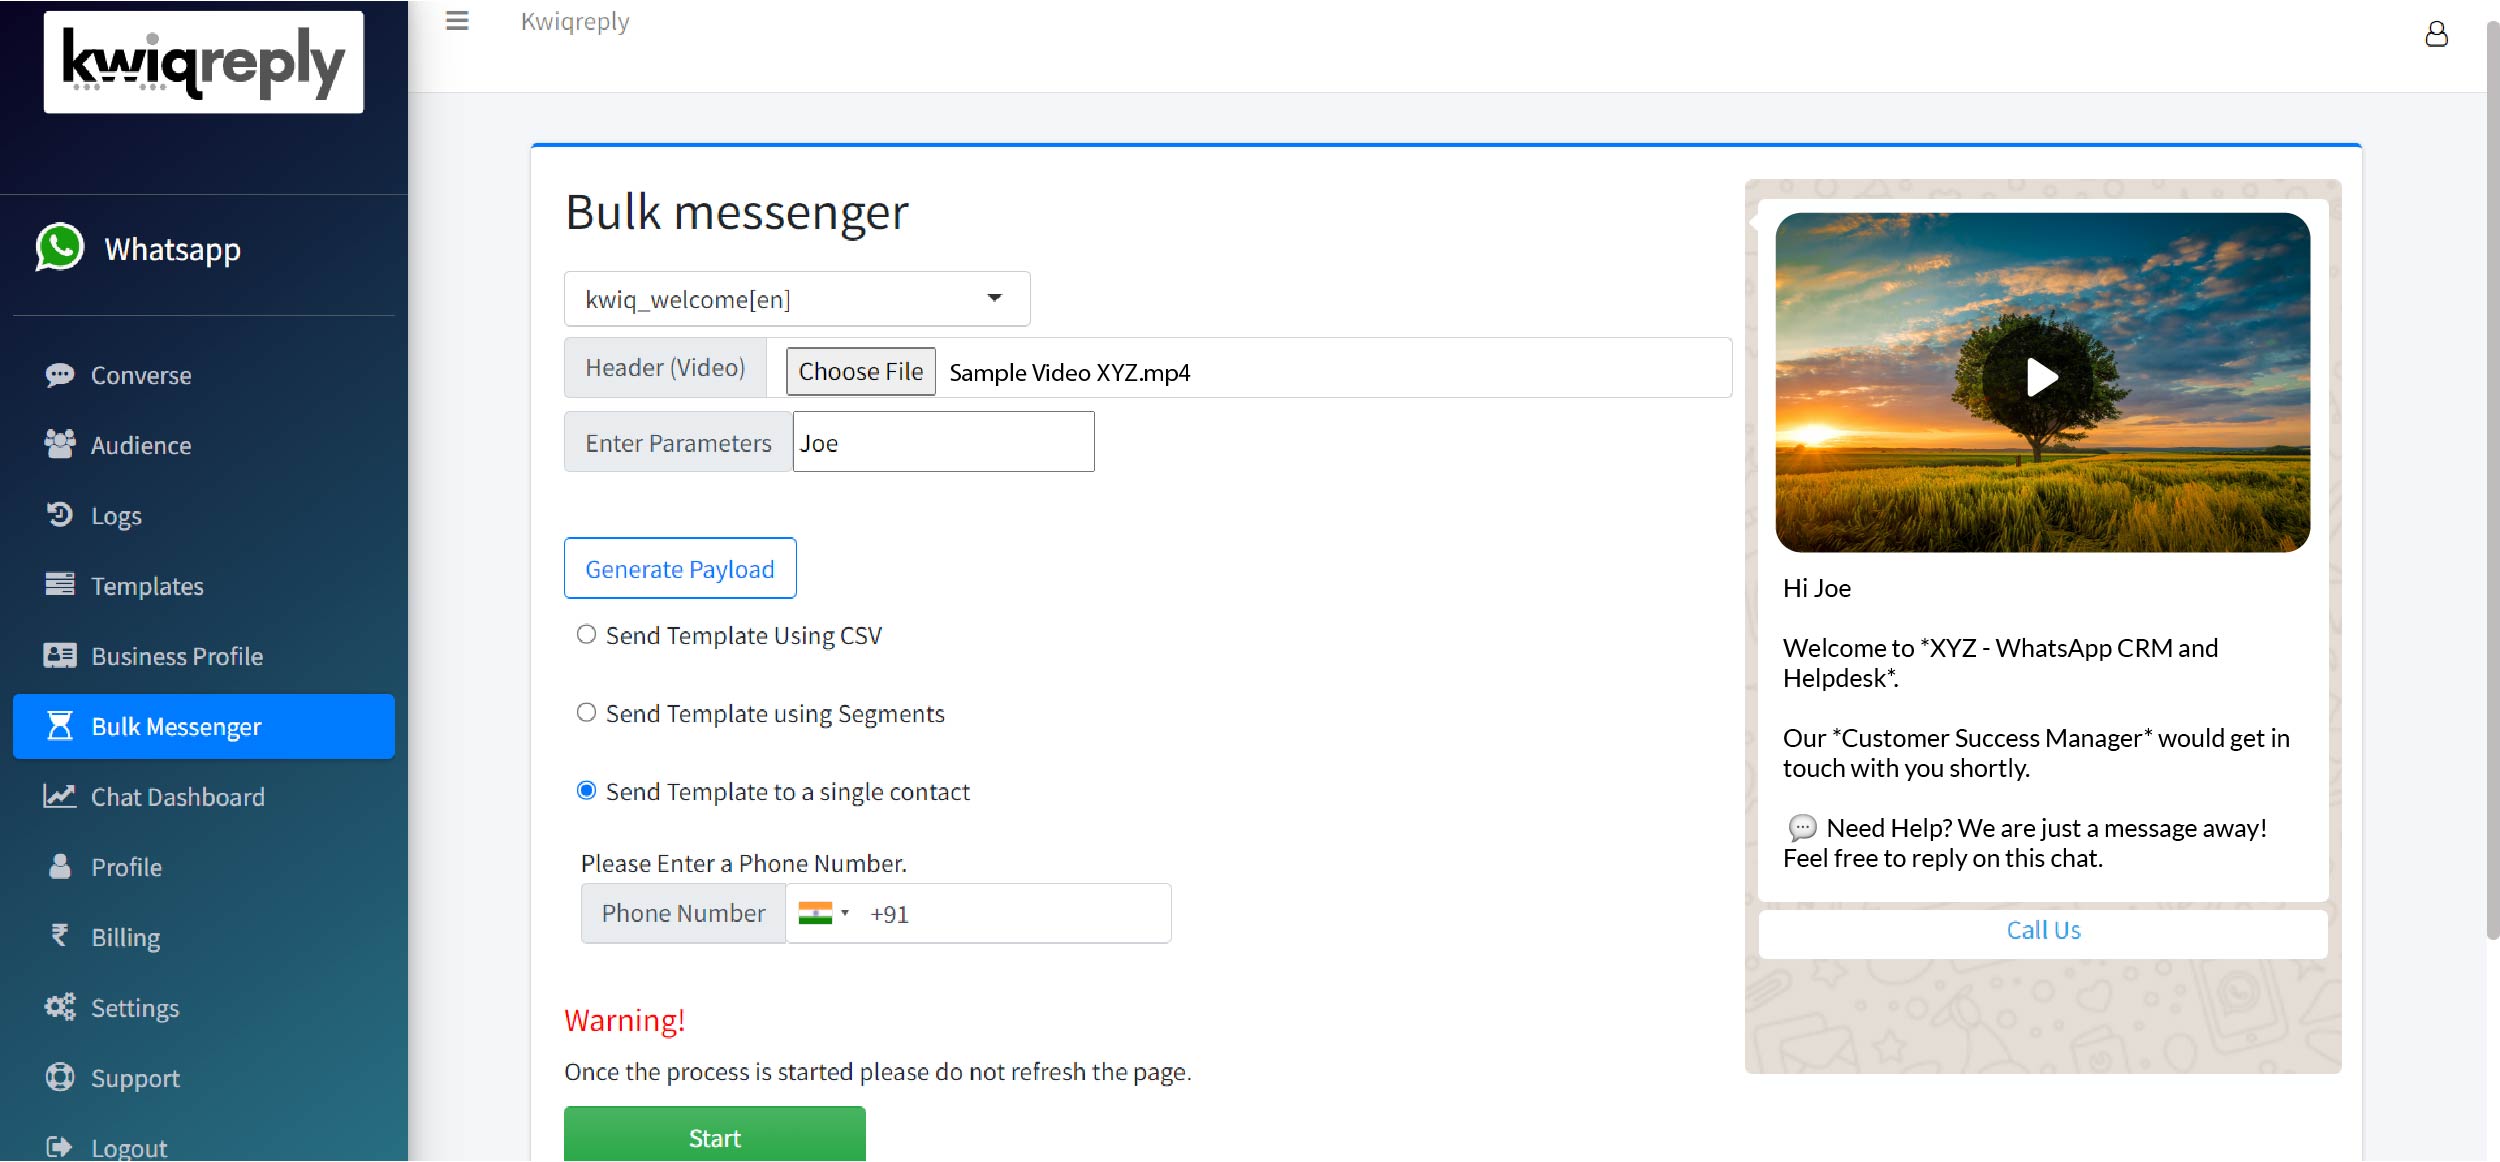 Bulk Messages Feature where approved templates can be sent to uploaded customers using a few clicks